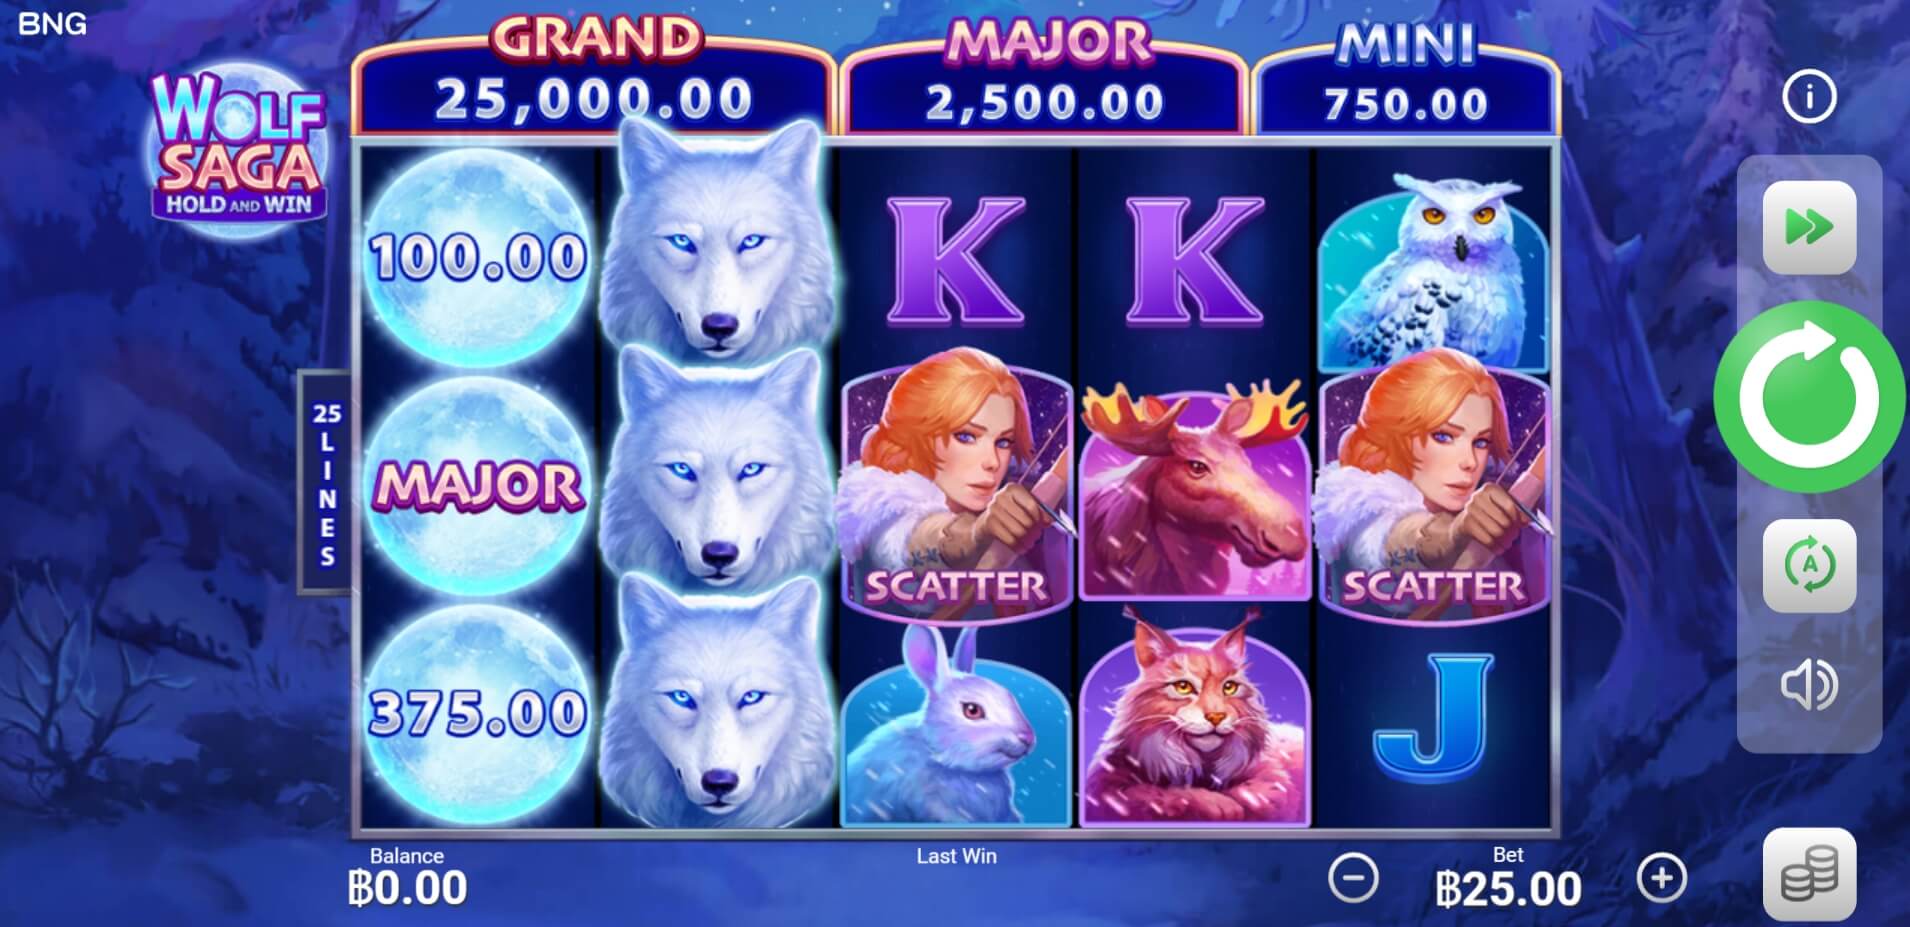 Wolf Saga Hold And Win Boongo Superslot247